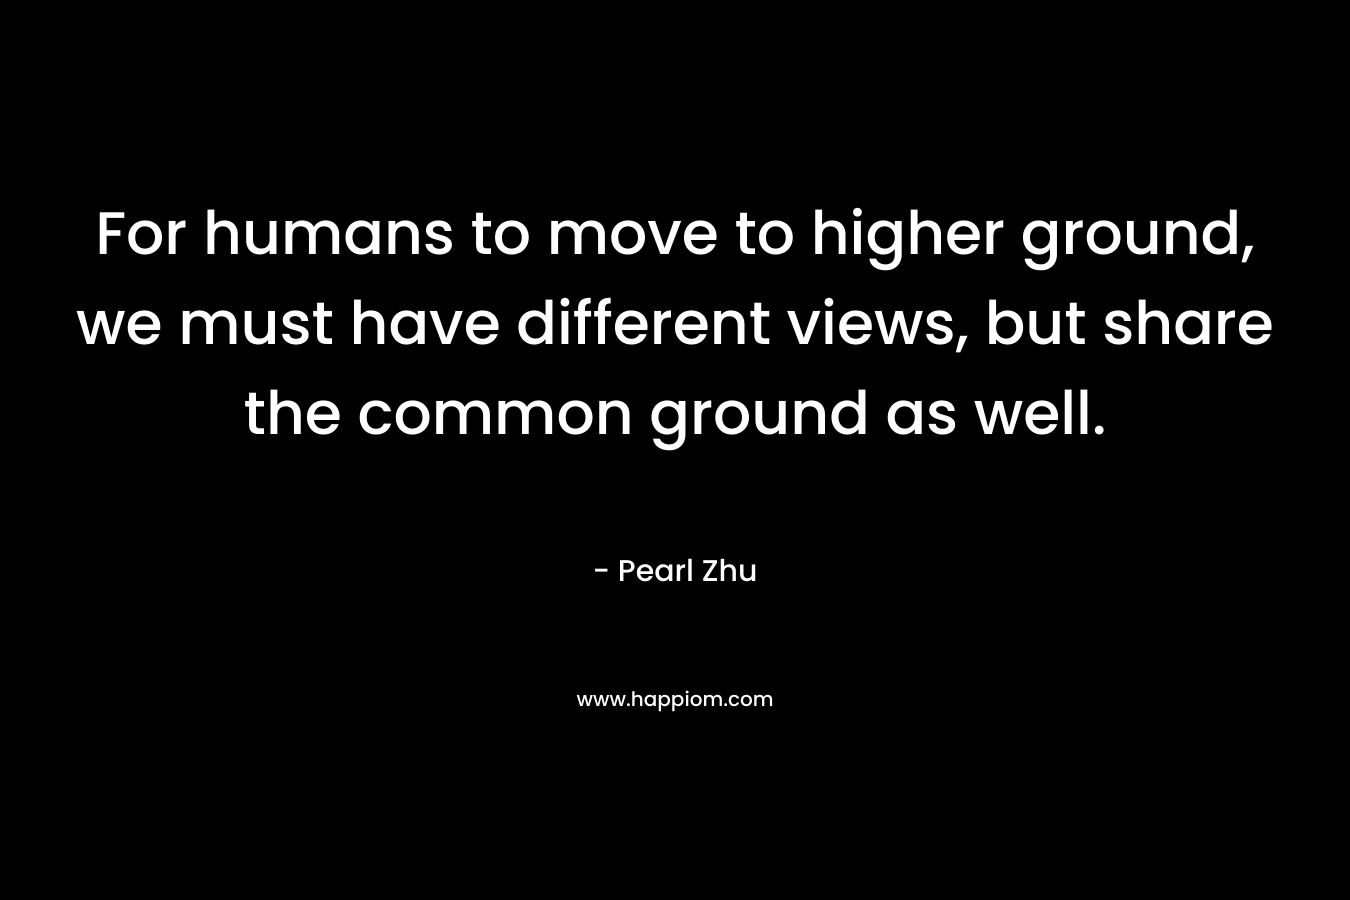 For humans to move to higher ground, we must have different views, but share the common ground as well.